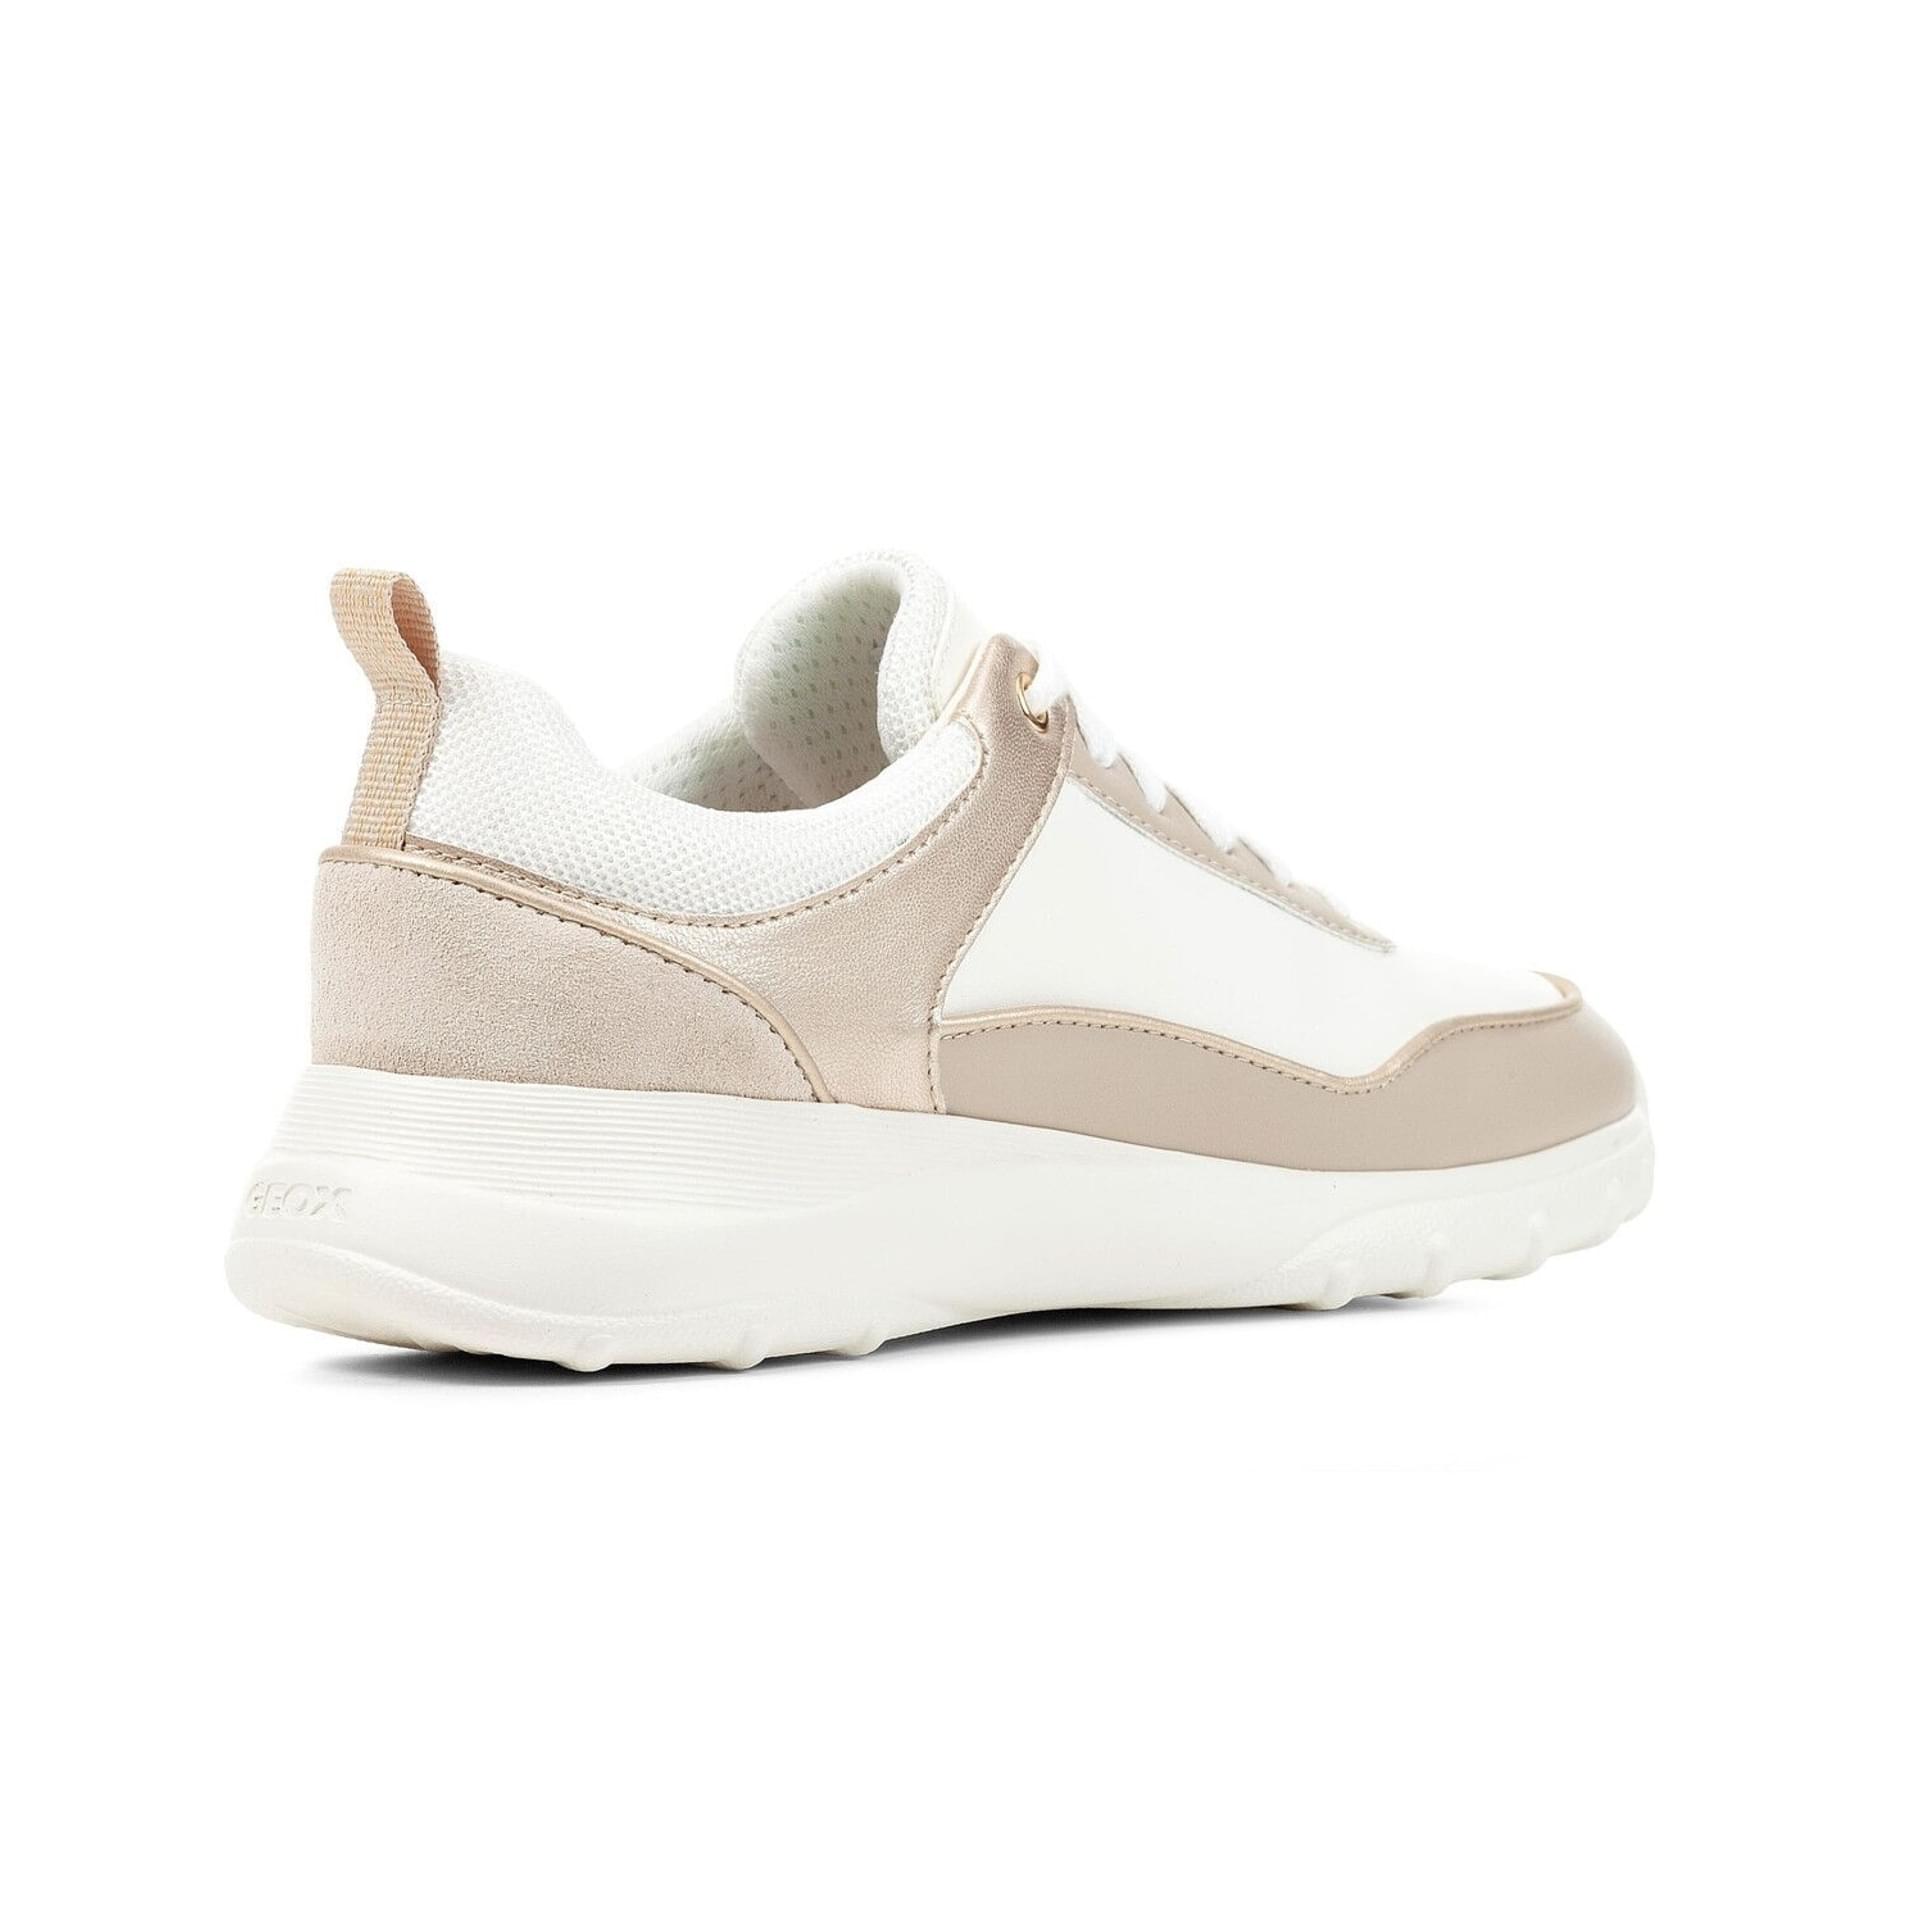 Geox Alleniee Sneakers D35LPB_00054 in Light Taupe/Off White